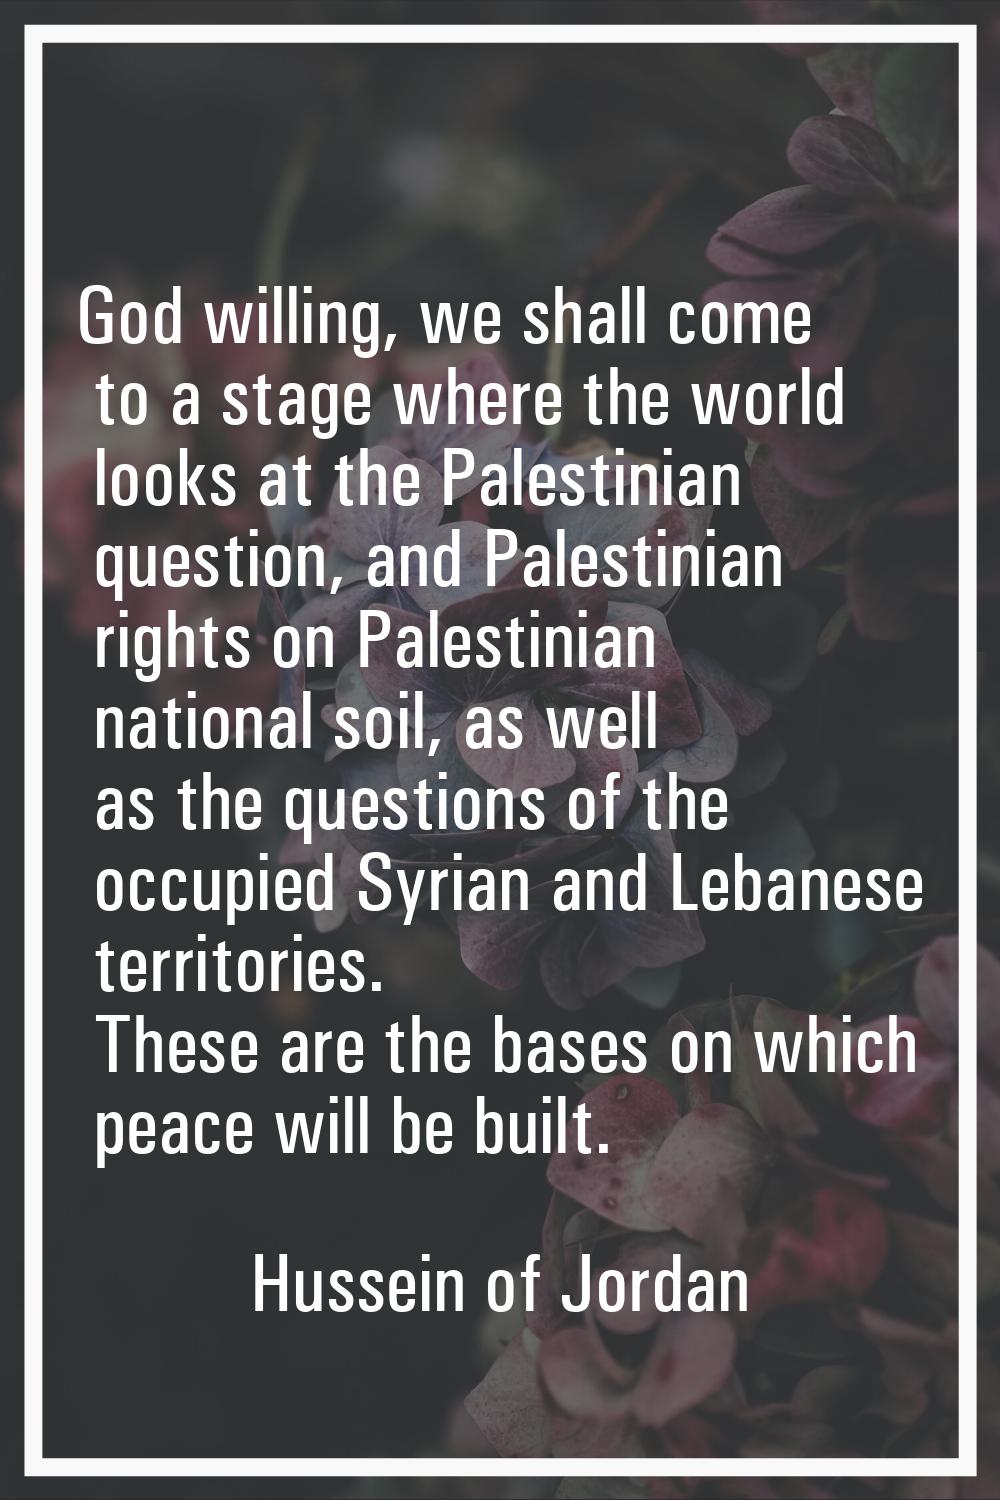 God willing, we shall come to a stage where the world looks at the Palestinian question, and Palest